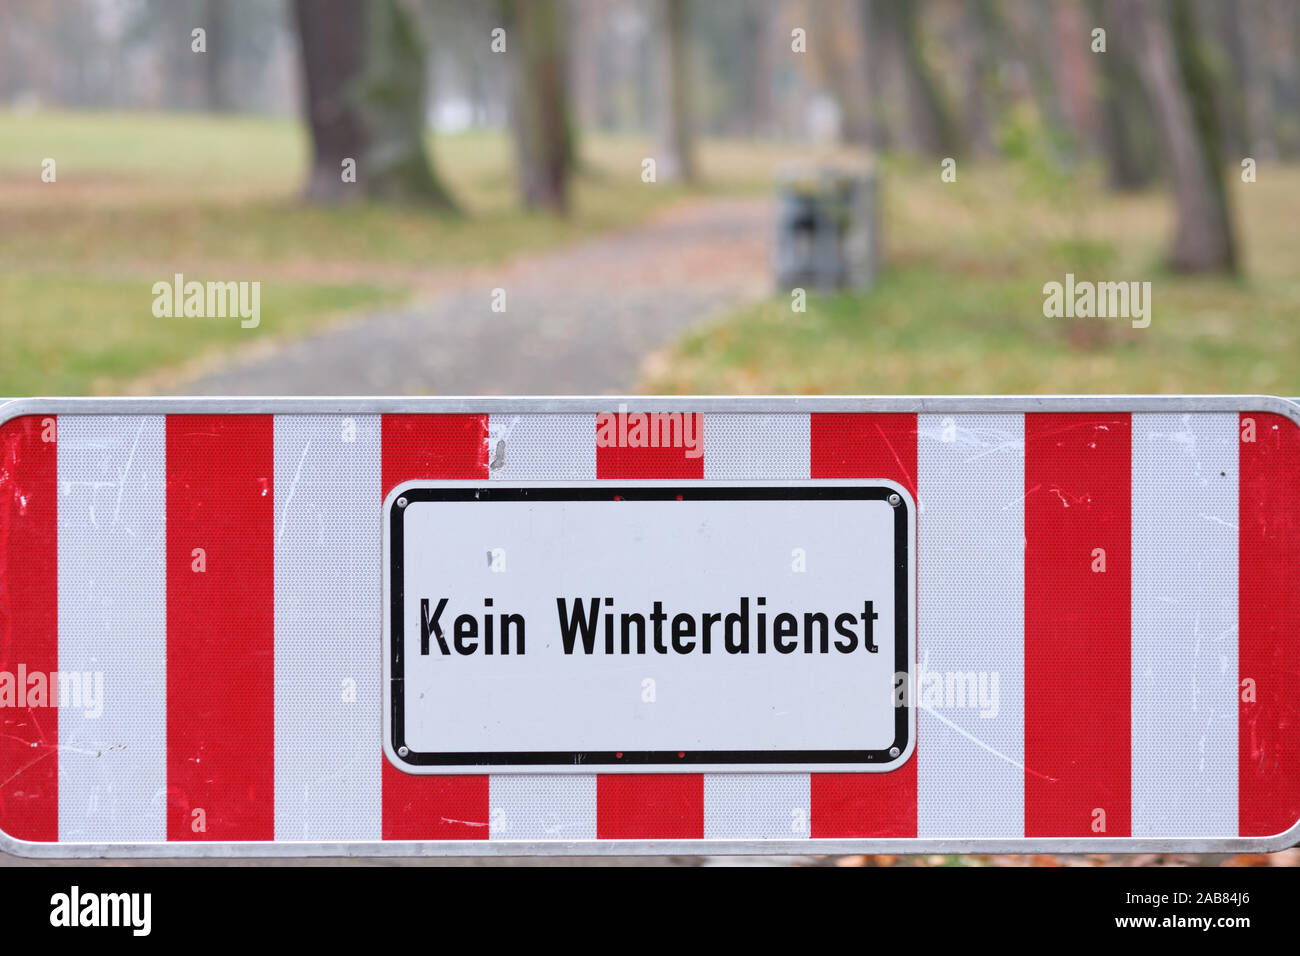 A red and white sign on a footpath at the entrance of a park in Nuremberg informs ' Kein Winterdienst ' (in Englisch: no winter service ). Seen in Fra Stock Photo